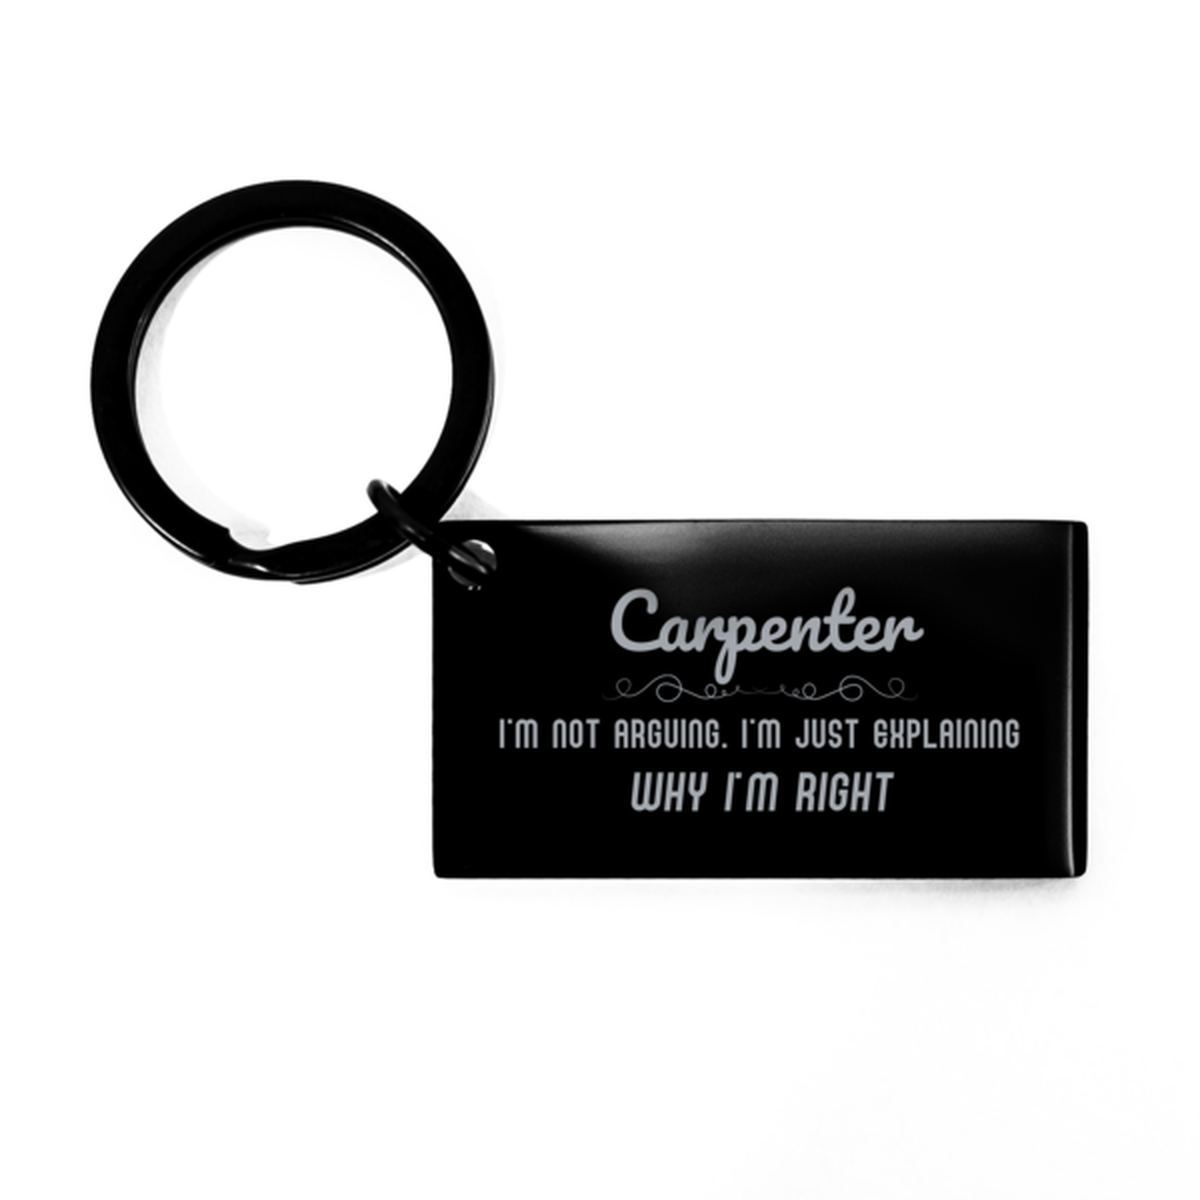 Carpenter I'm not Arguing. I'm Just Explaining Why I'm RIGHT Keychain, Funny Saying Quote Carpenter Gifts For Carpenter Graduation Birthday Christmas Gifts for Men Women Coworker